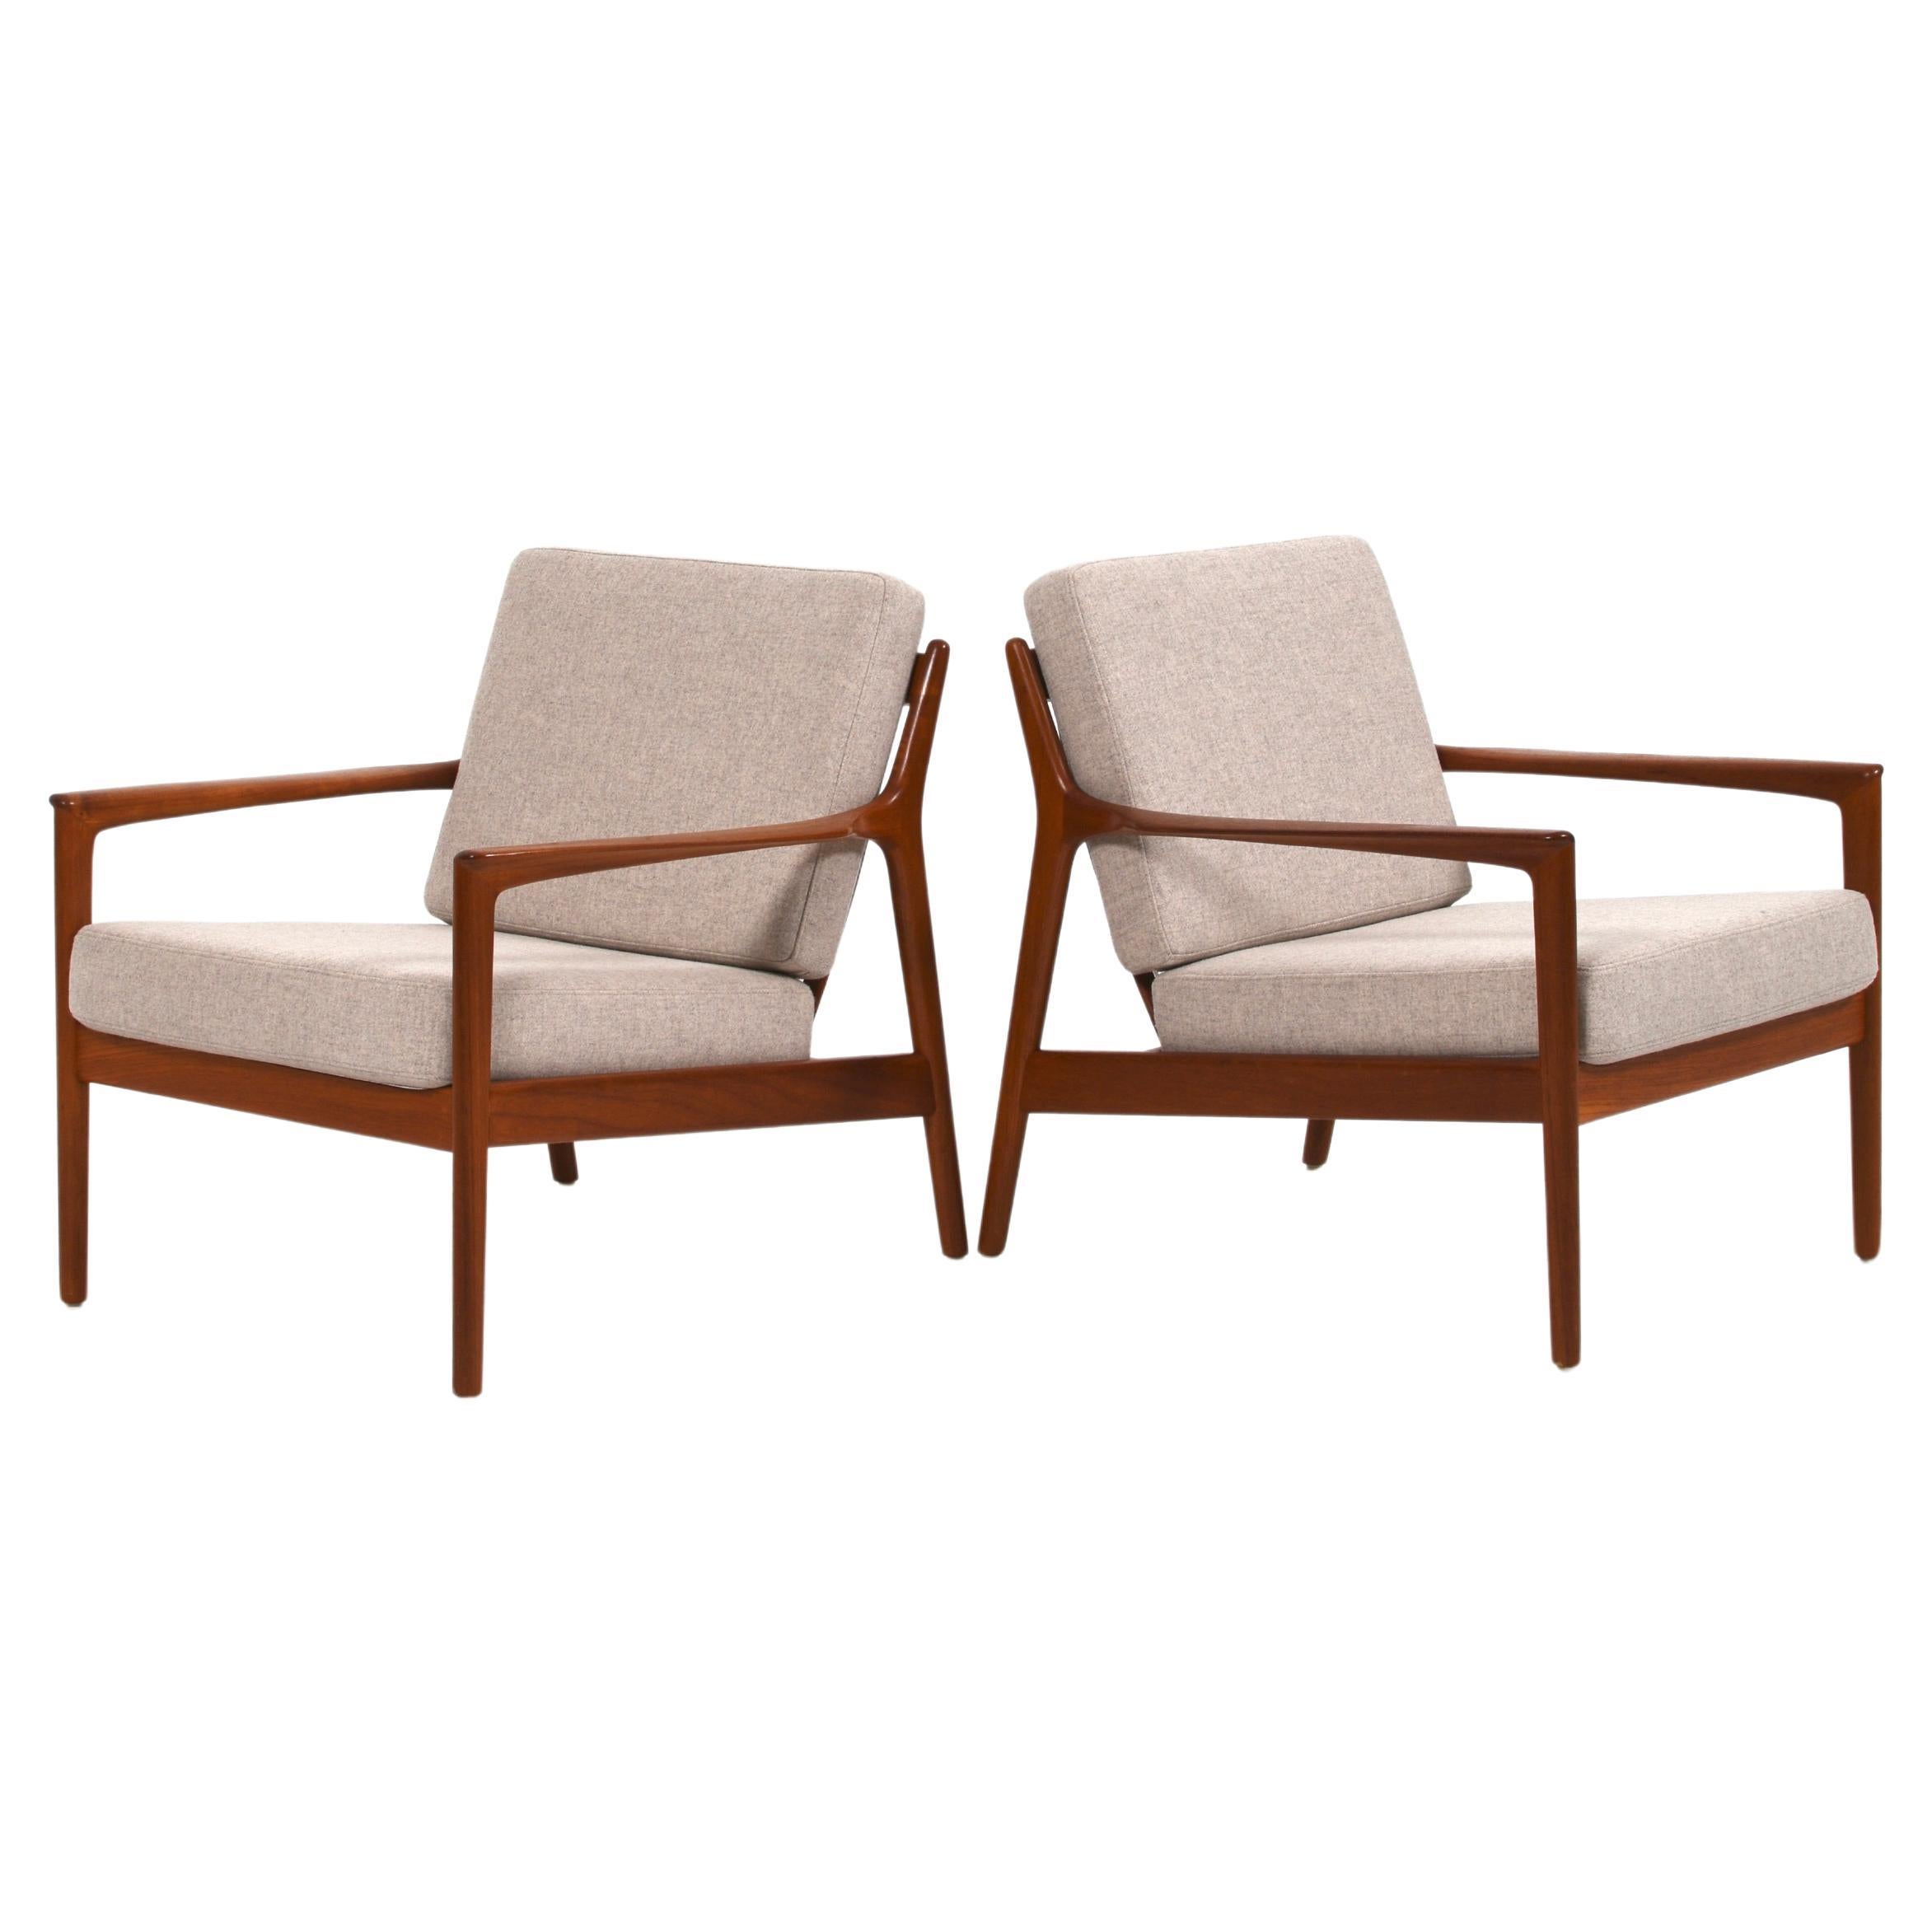 Pair of “USA 75” Teak Lounge Chairs by Folke Ohlsson for DUX, Sweden, 1960s